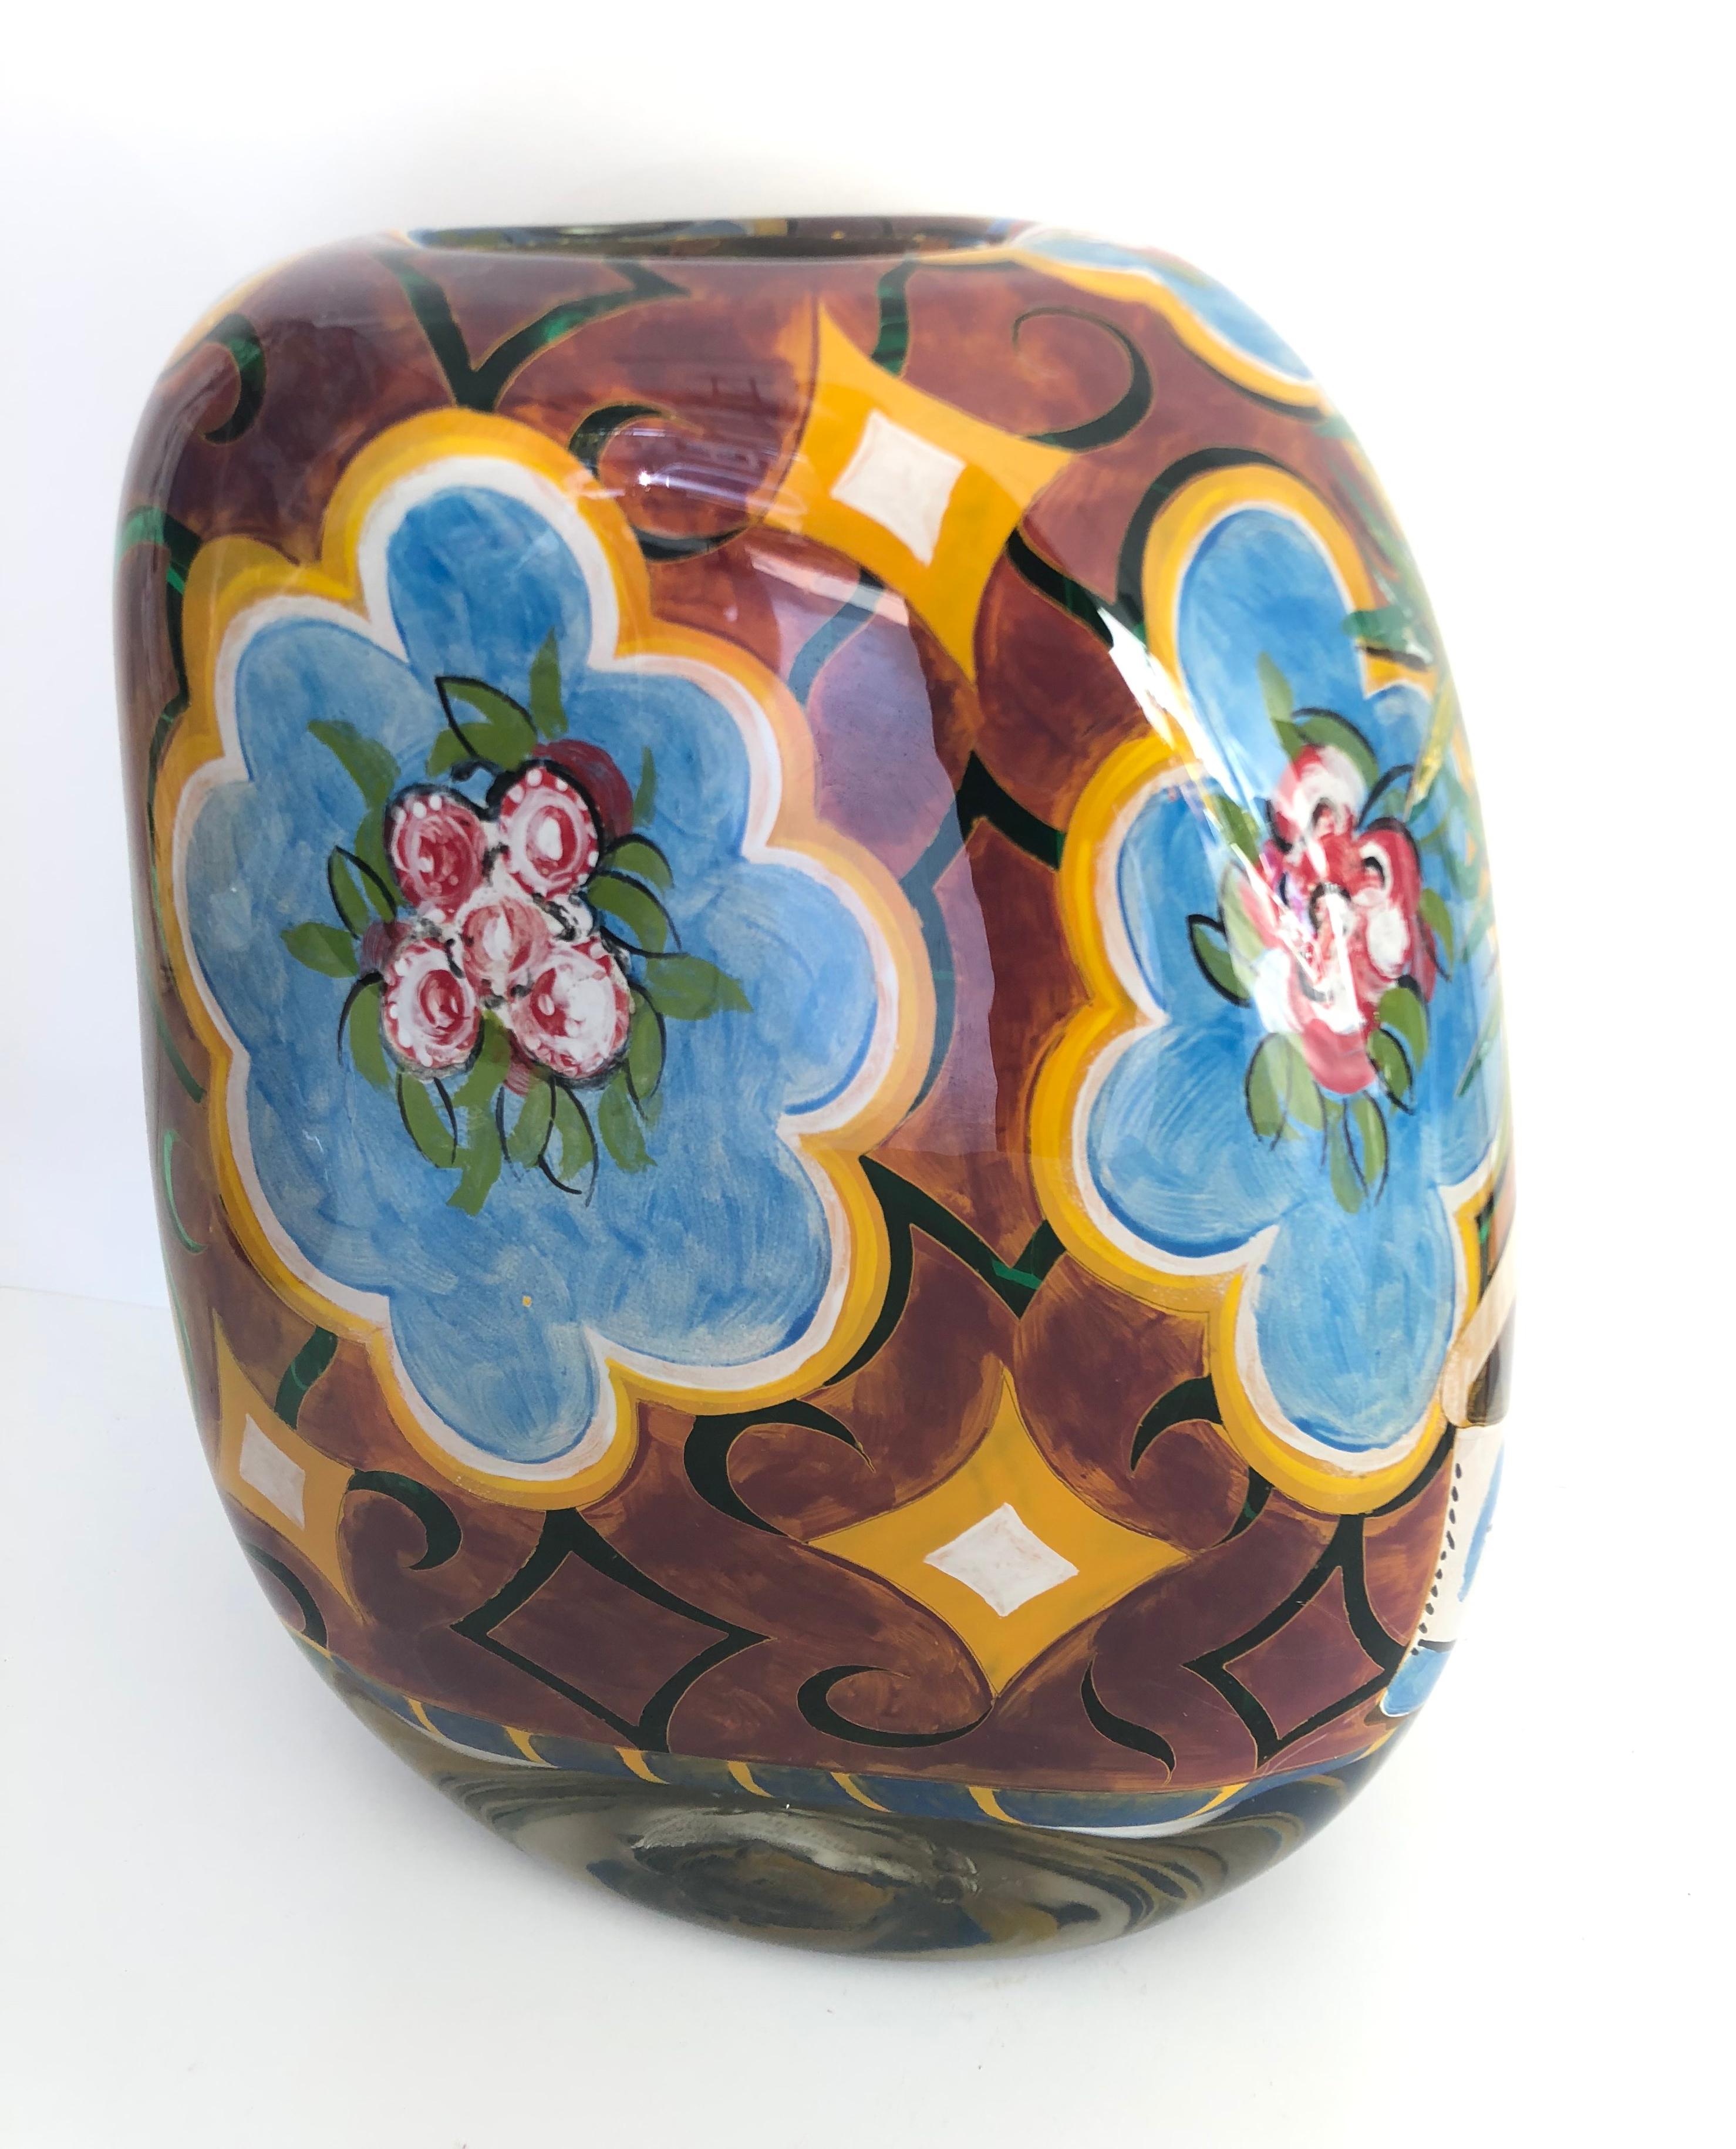 Stunning Ada Loumani Art Glass Vase, signed, handblown and hand-painted under glass in Matisse Style.
Ada Loumani is a French artist, born in 1959. He comes from a family of glassmakers, and continued this tradition through a contemporary optic, in